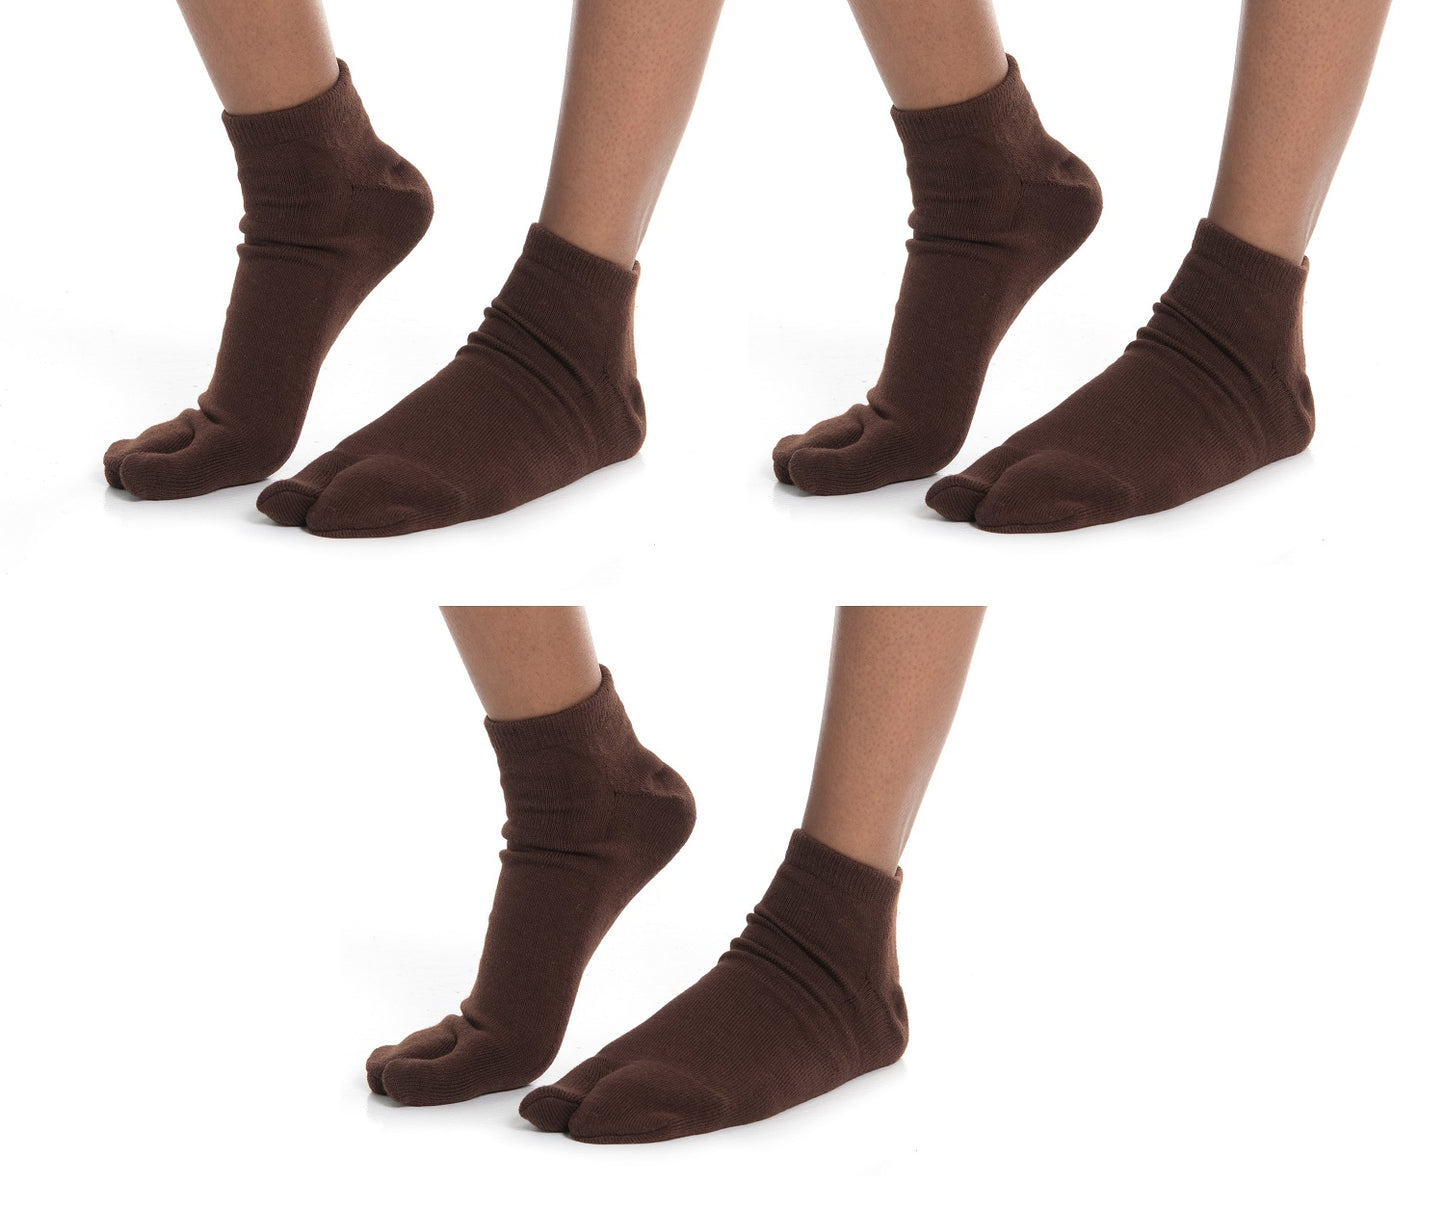 V-Toe Split Toe Ankle Tabi 3 Pairs Thicker Warm Styles Athletic or Casual - Brown